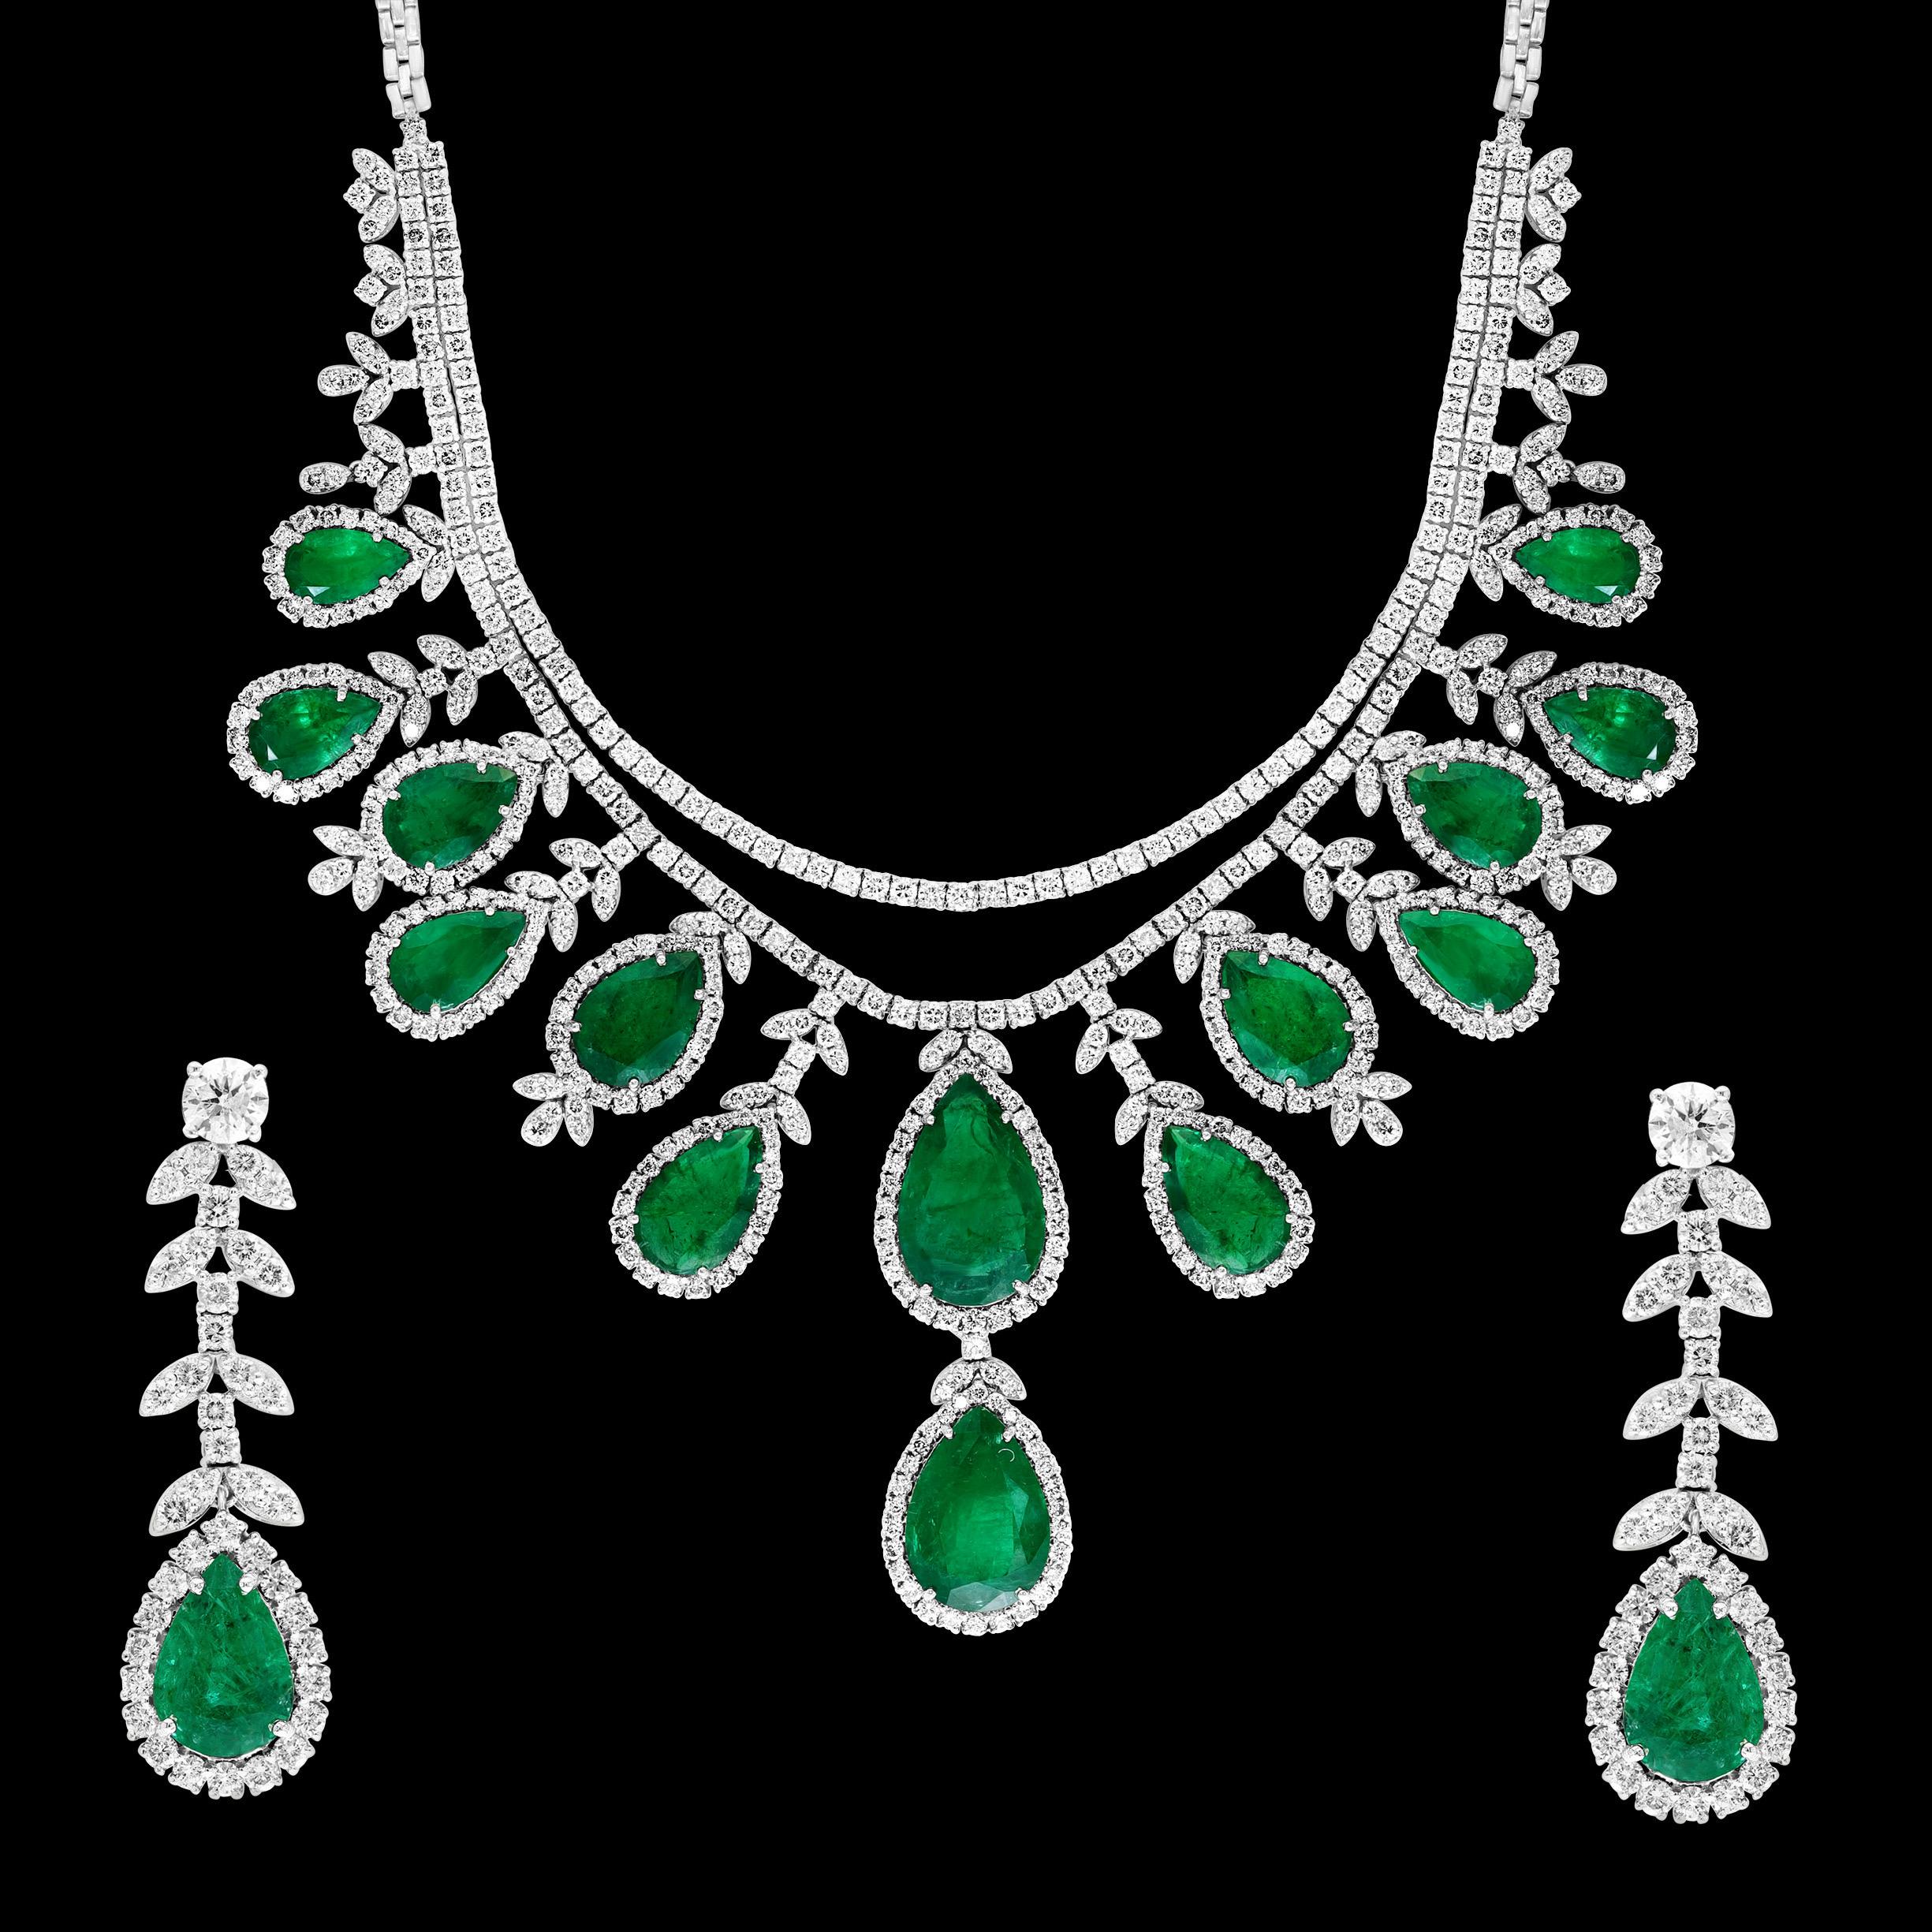  75 Ct  Zambian Emerald and 30 Ct Diamond Necklace and Earring Bridal Suite
Emeralds are Zambians.
23x14 larges pear shape 
19X13.5 next size which is a bottom drop 
16X10, 15X10 , 14X10 and smallest 12 X7
Total Ct weight 75 Cts
There are two layers